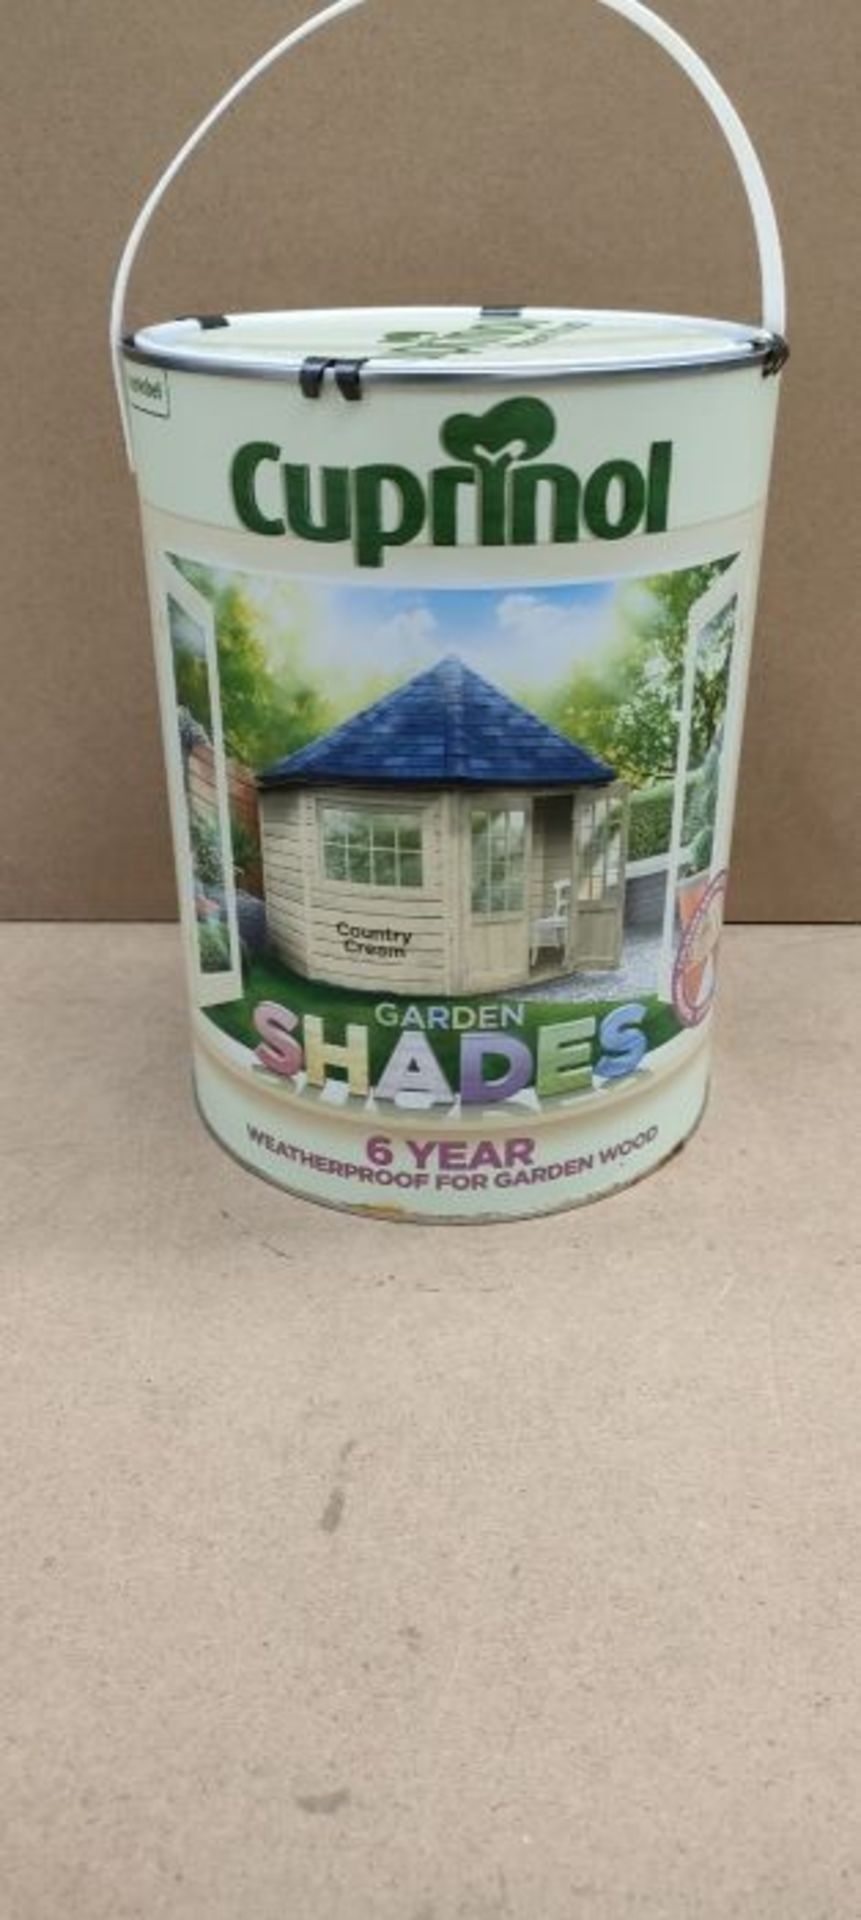 Cuprinol CUPGSHCC5L 5 Litre Garden Shades Paint - Country Cream - Image 2 of 2